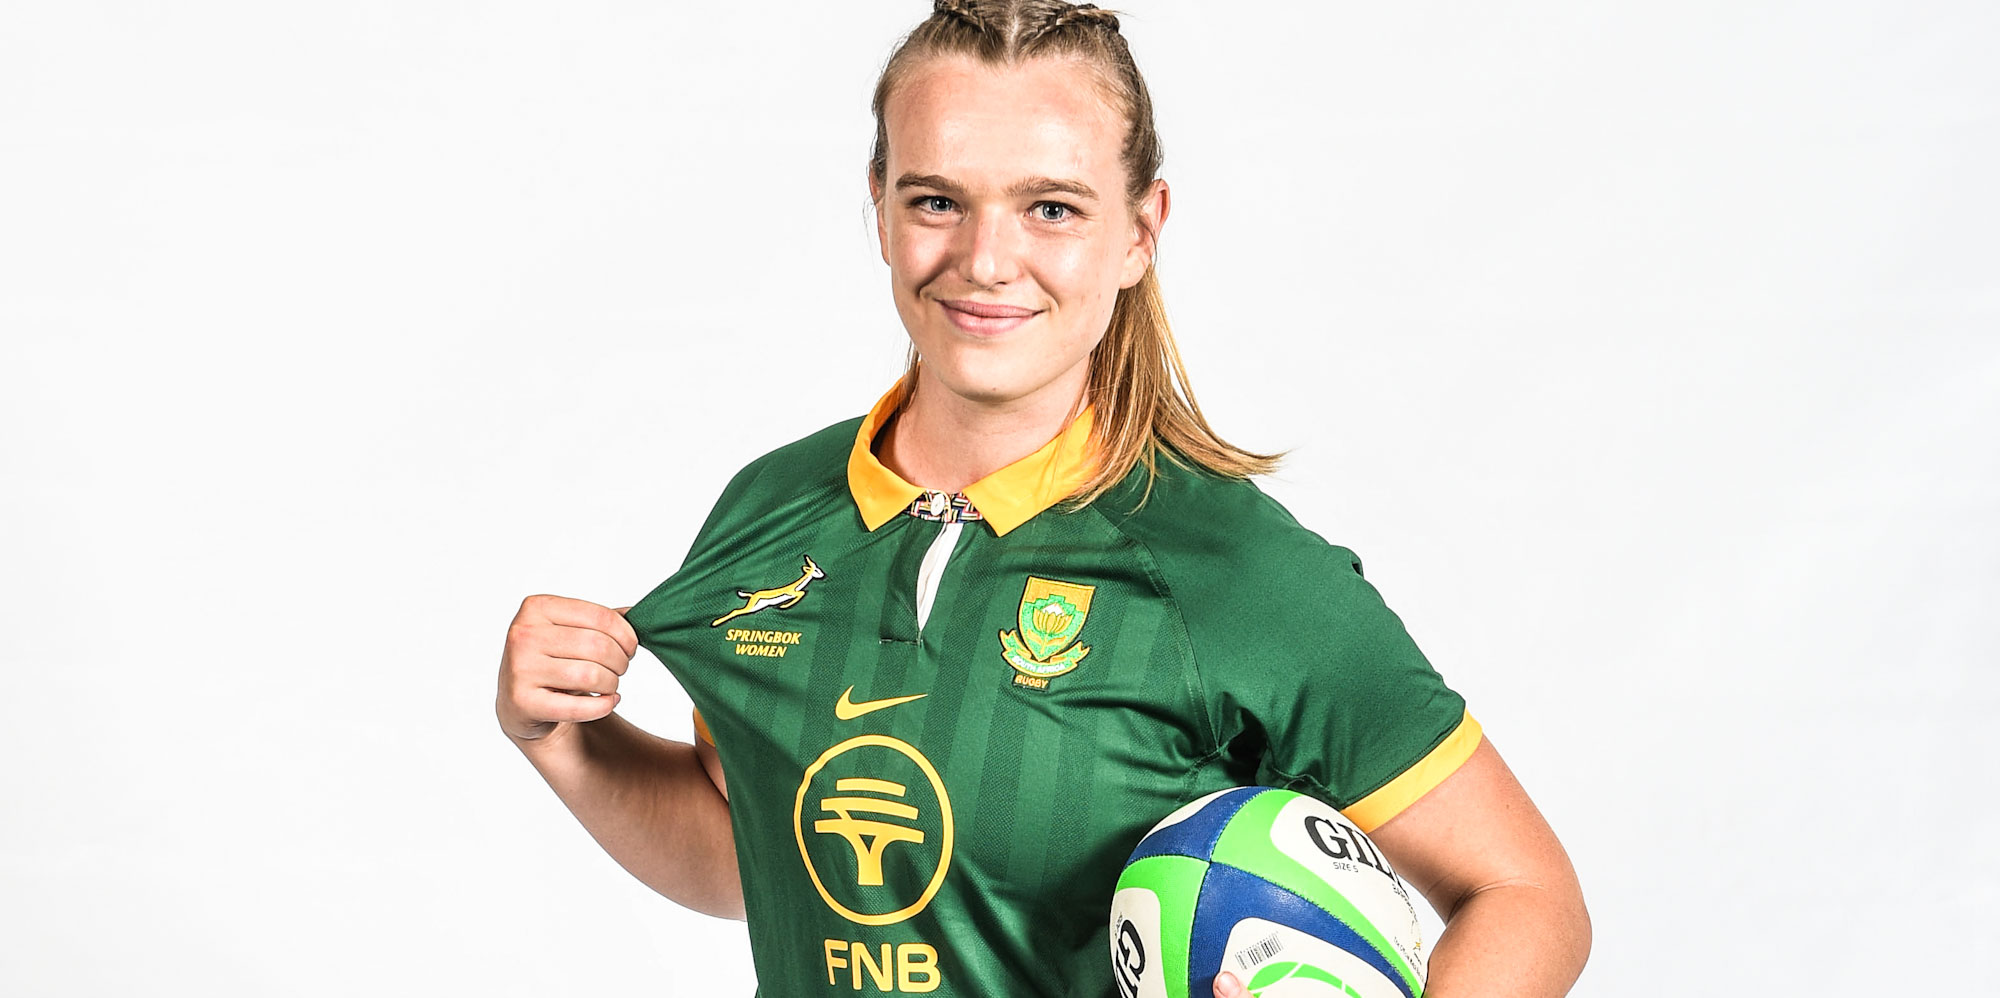 Samantha Els will get her first taste of action in the green and gold.